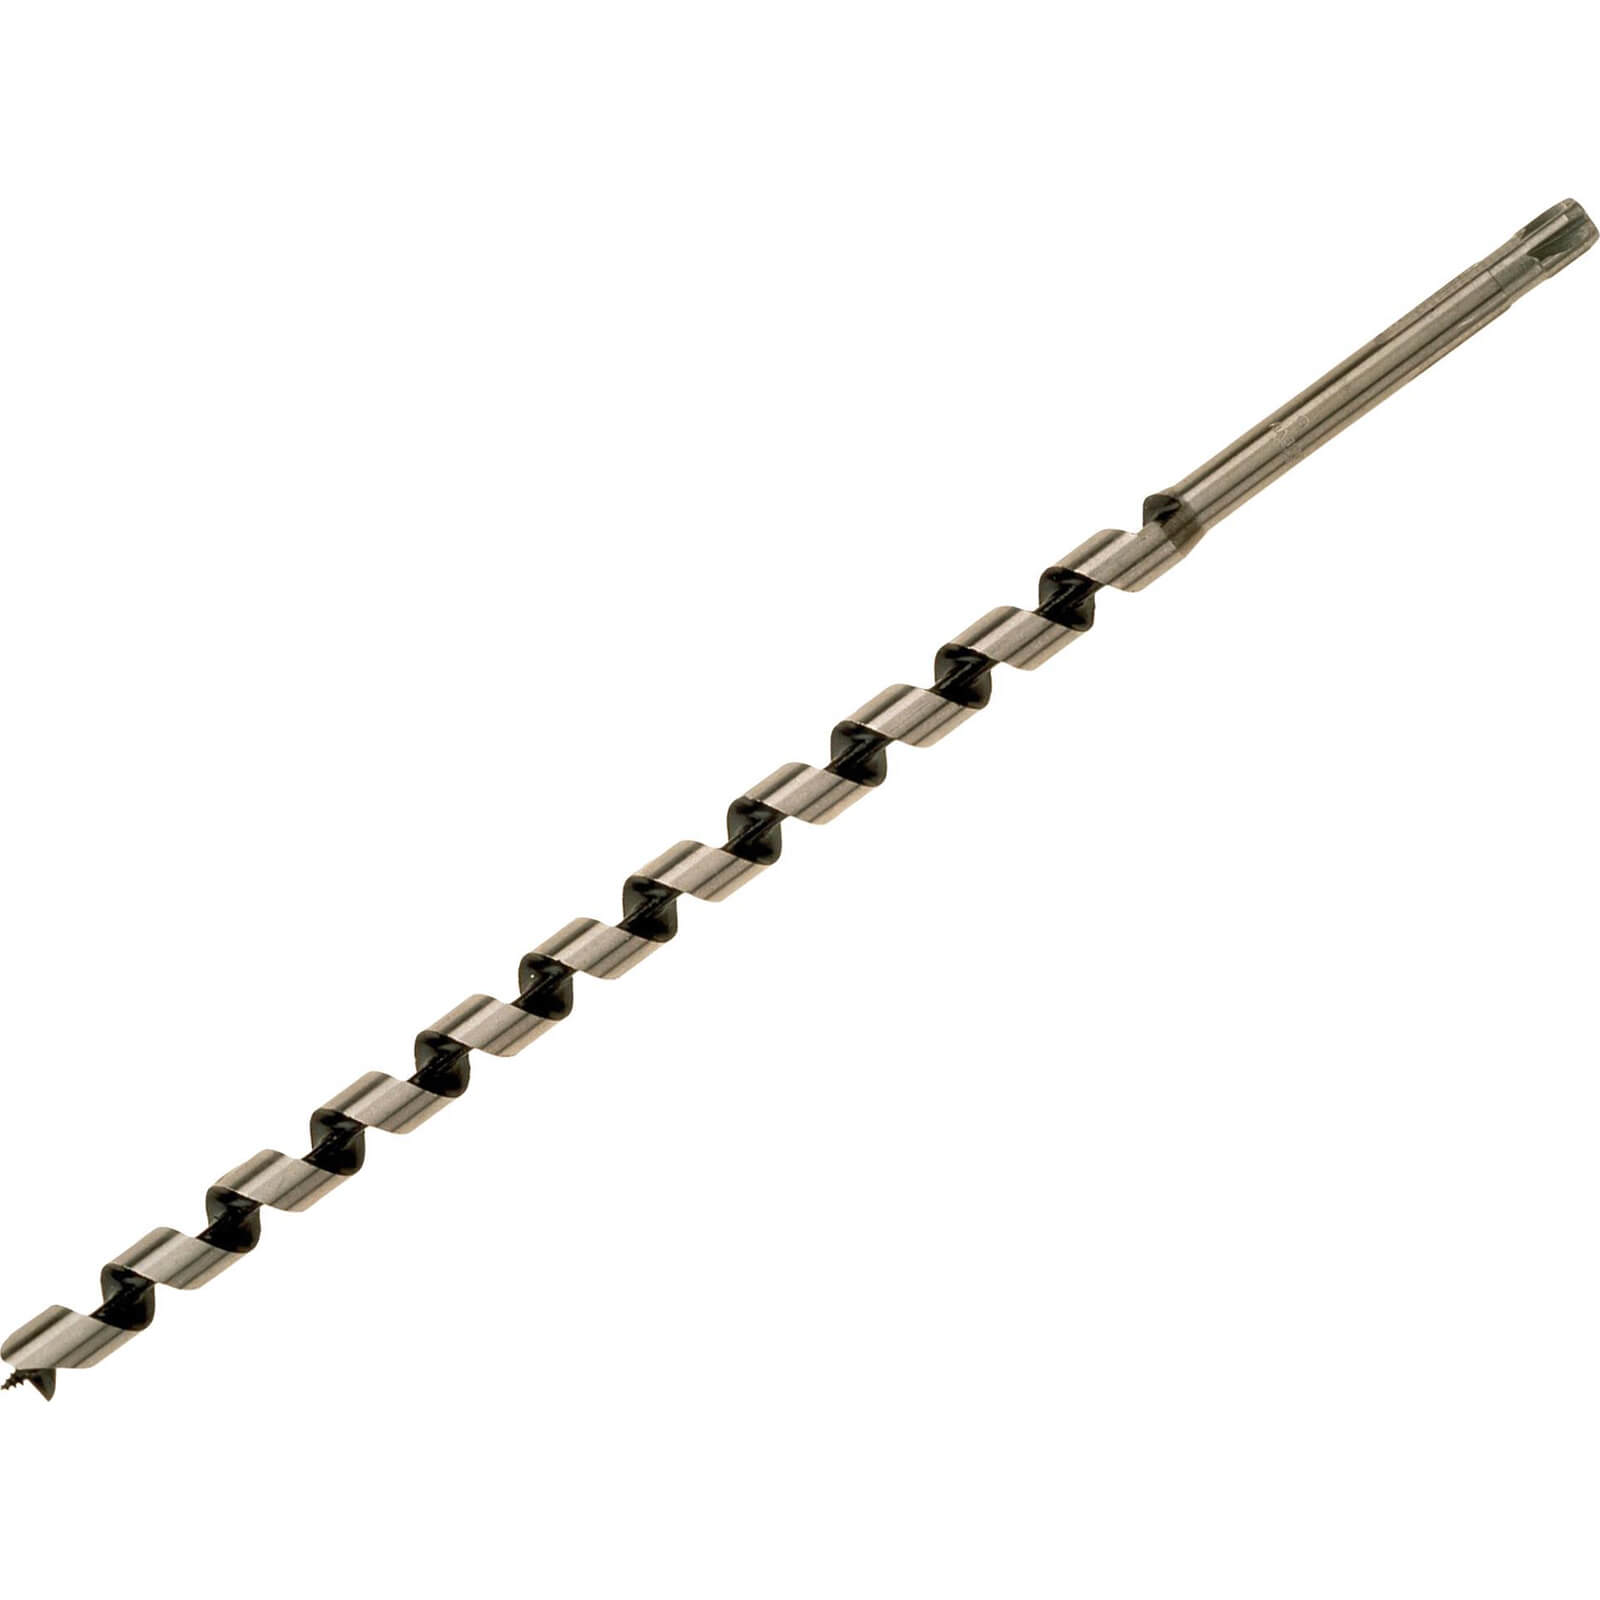 Image of Bahco 9627 Series Long Combination Auger Drill Bit 10mm 460mm